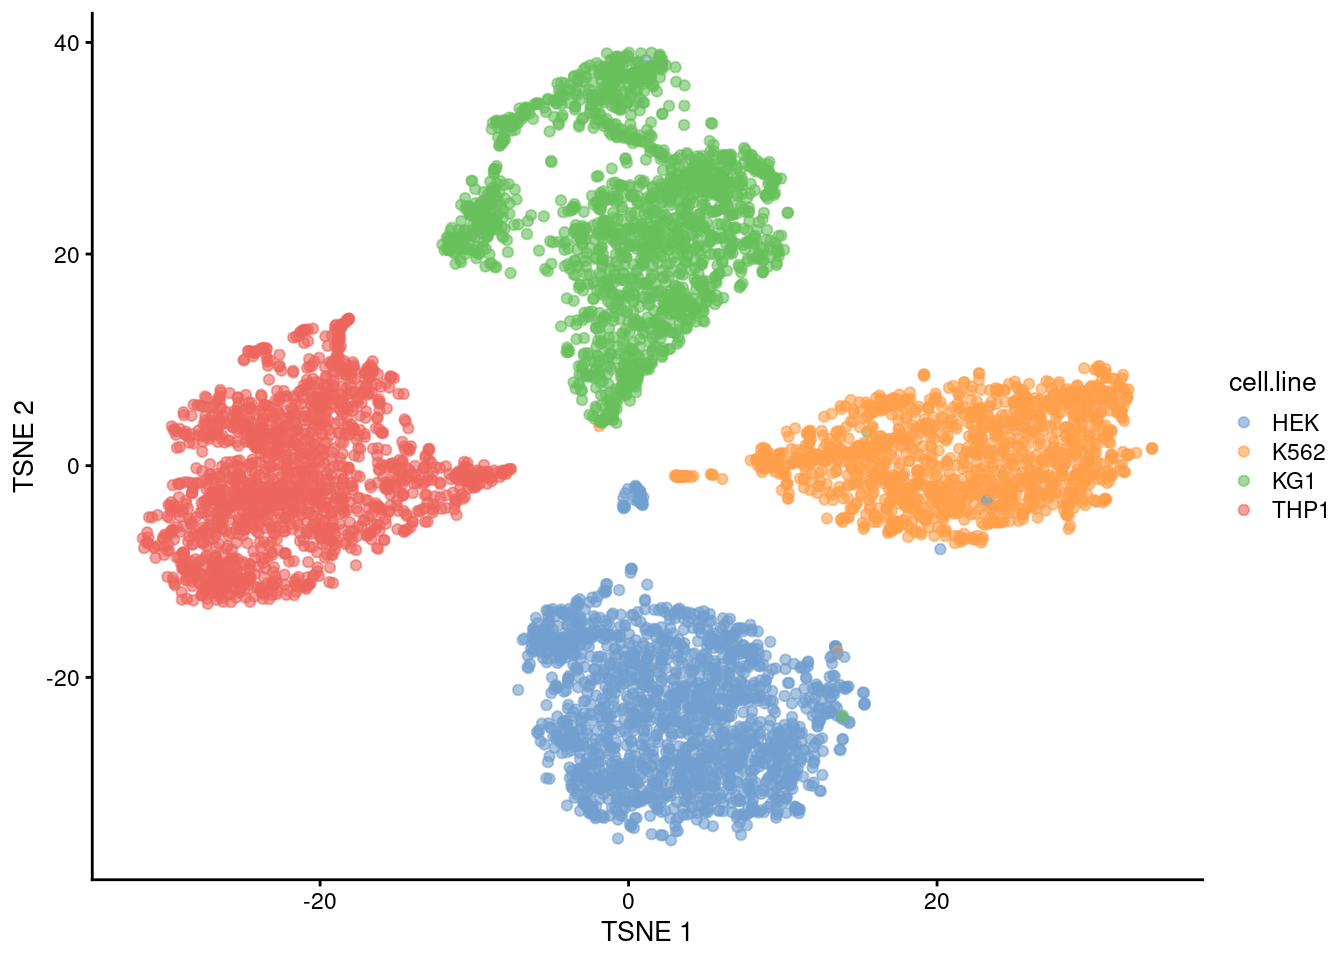 The usual $t$-SNE plot of the cell line mixture data, where each point is a cell and is colored by the cell line corresponding to its sample of origin.